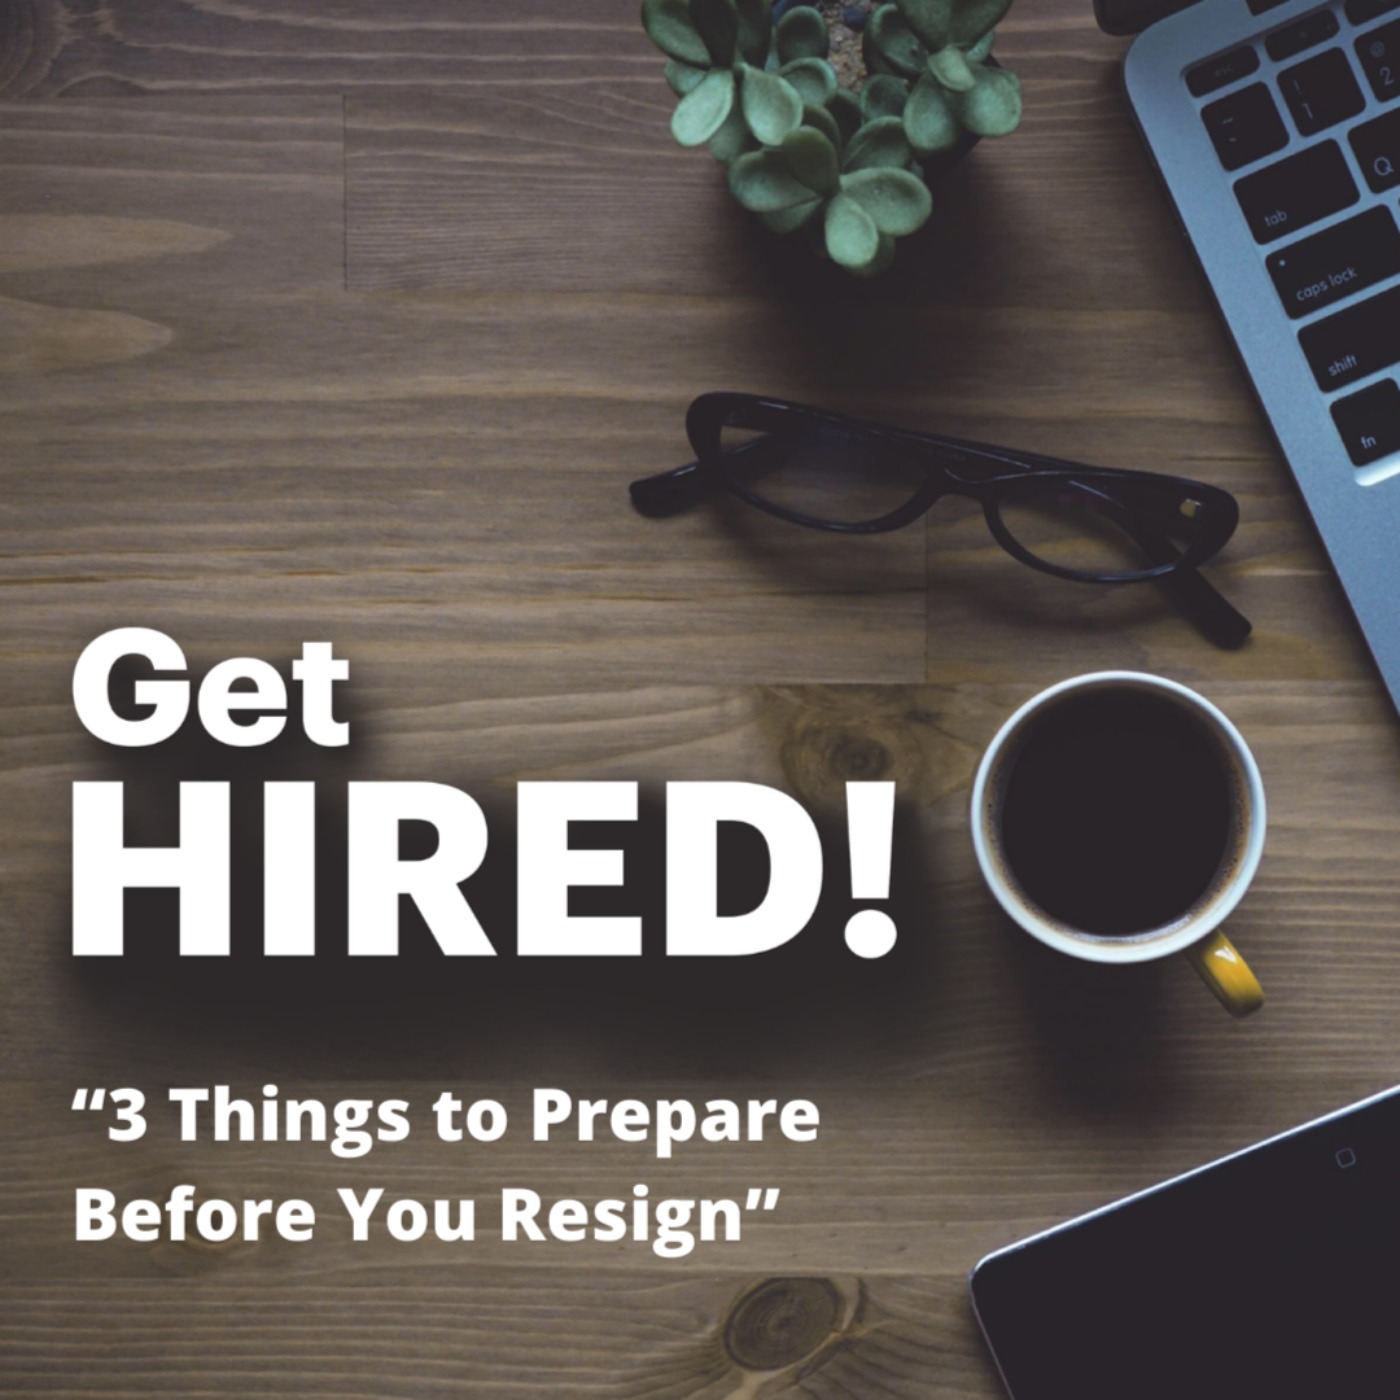 Get Hired: "3 Things to Prepare Before You Resign"